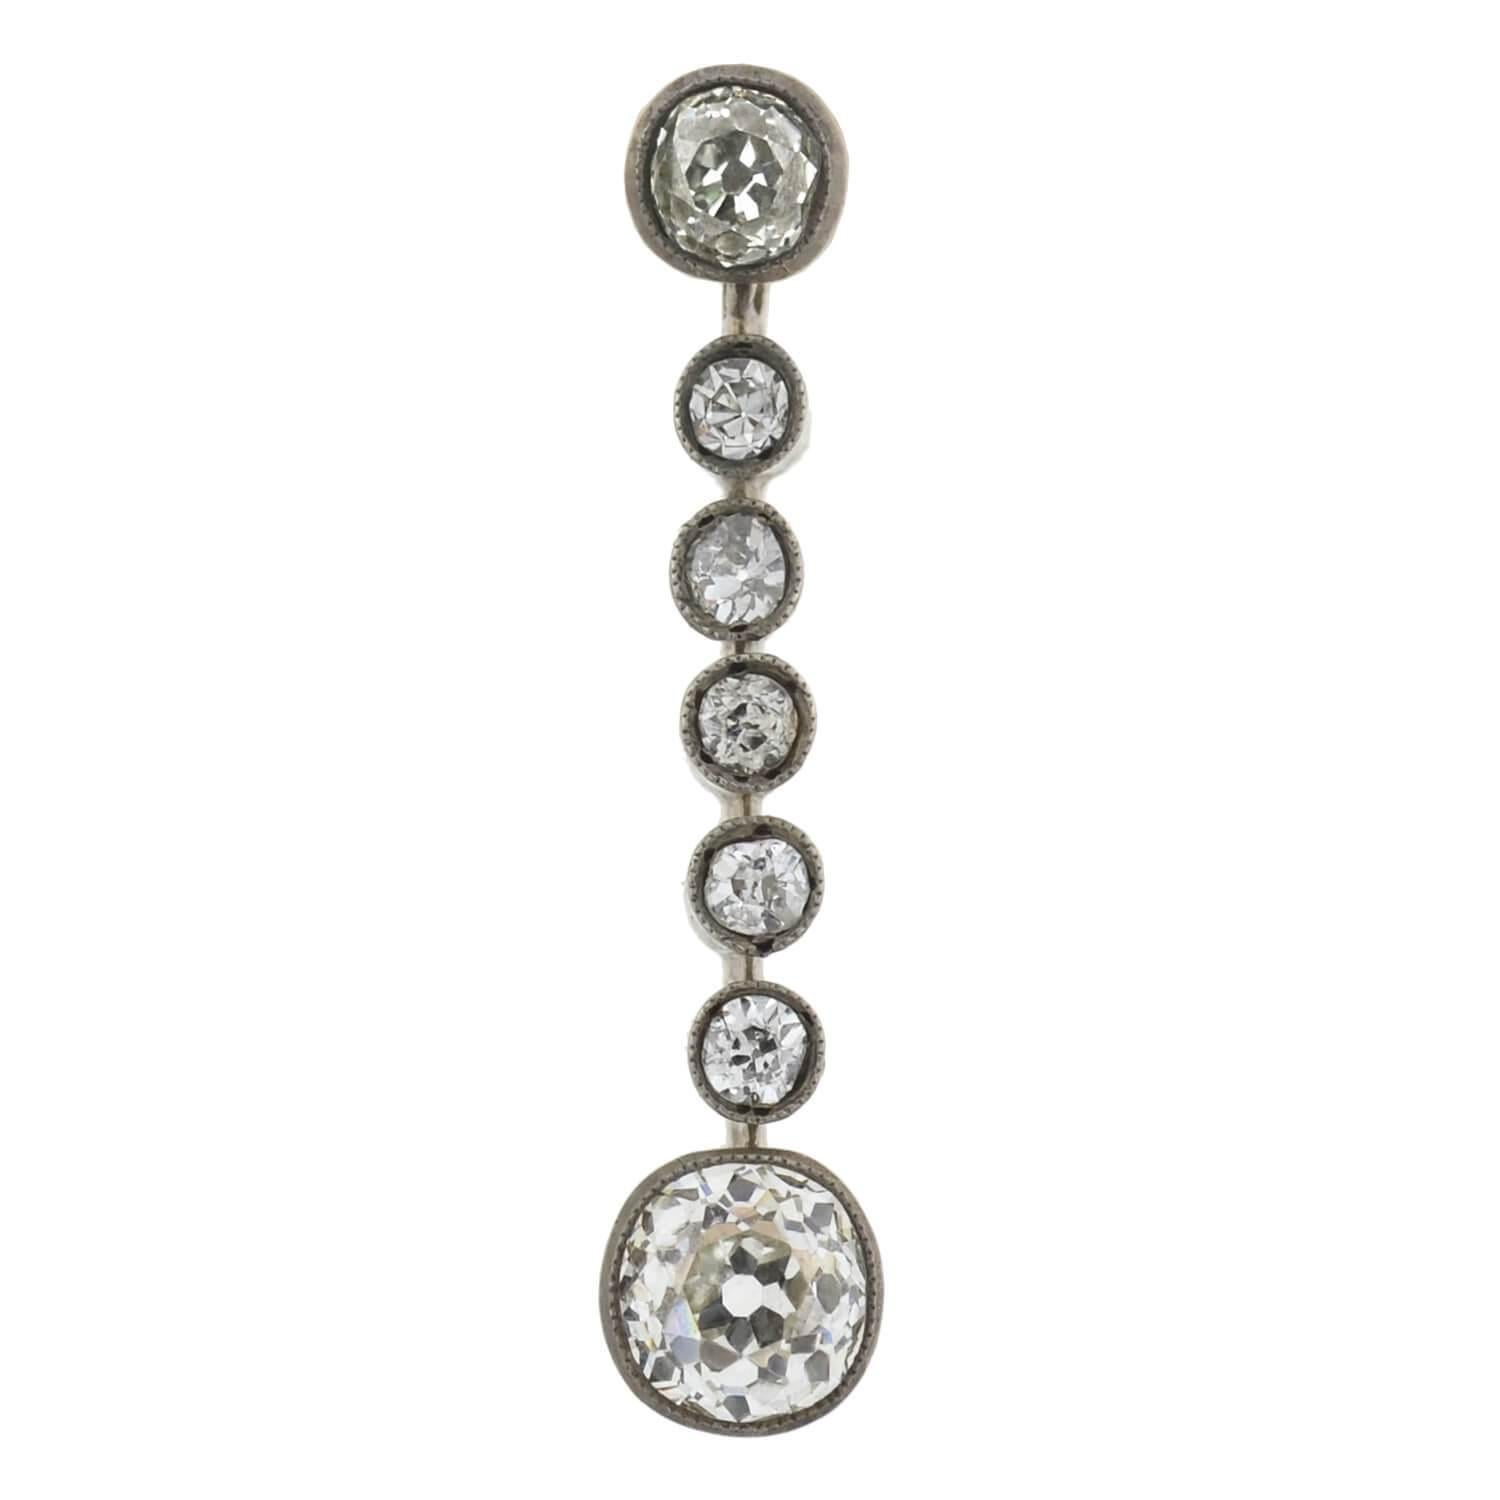 An exquisite pair of diamond drop earrings from the Victorian (ca1880) era! Crafted in 14kt yellow gold topped with sterling silver, each stunning earring adorns a sparkling row of old Mine Cut diamonds. Resting at the base is the largest diamond,